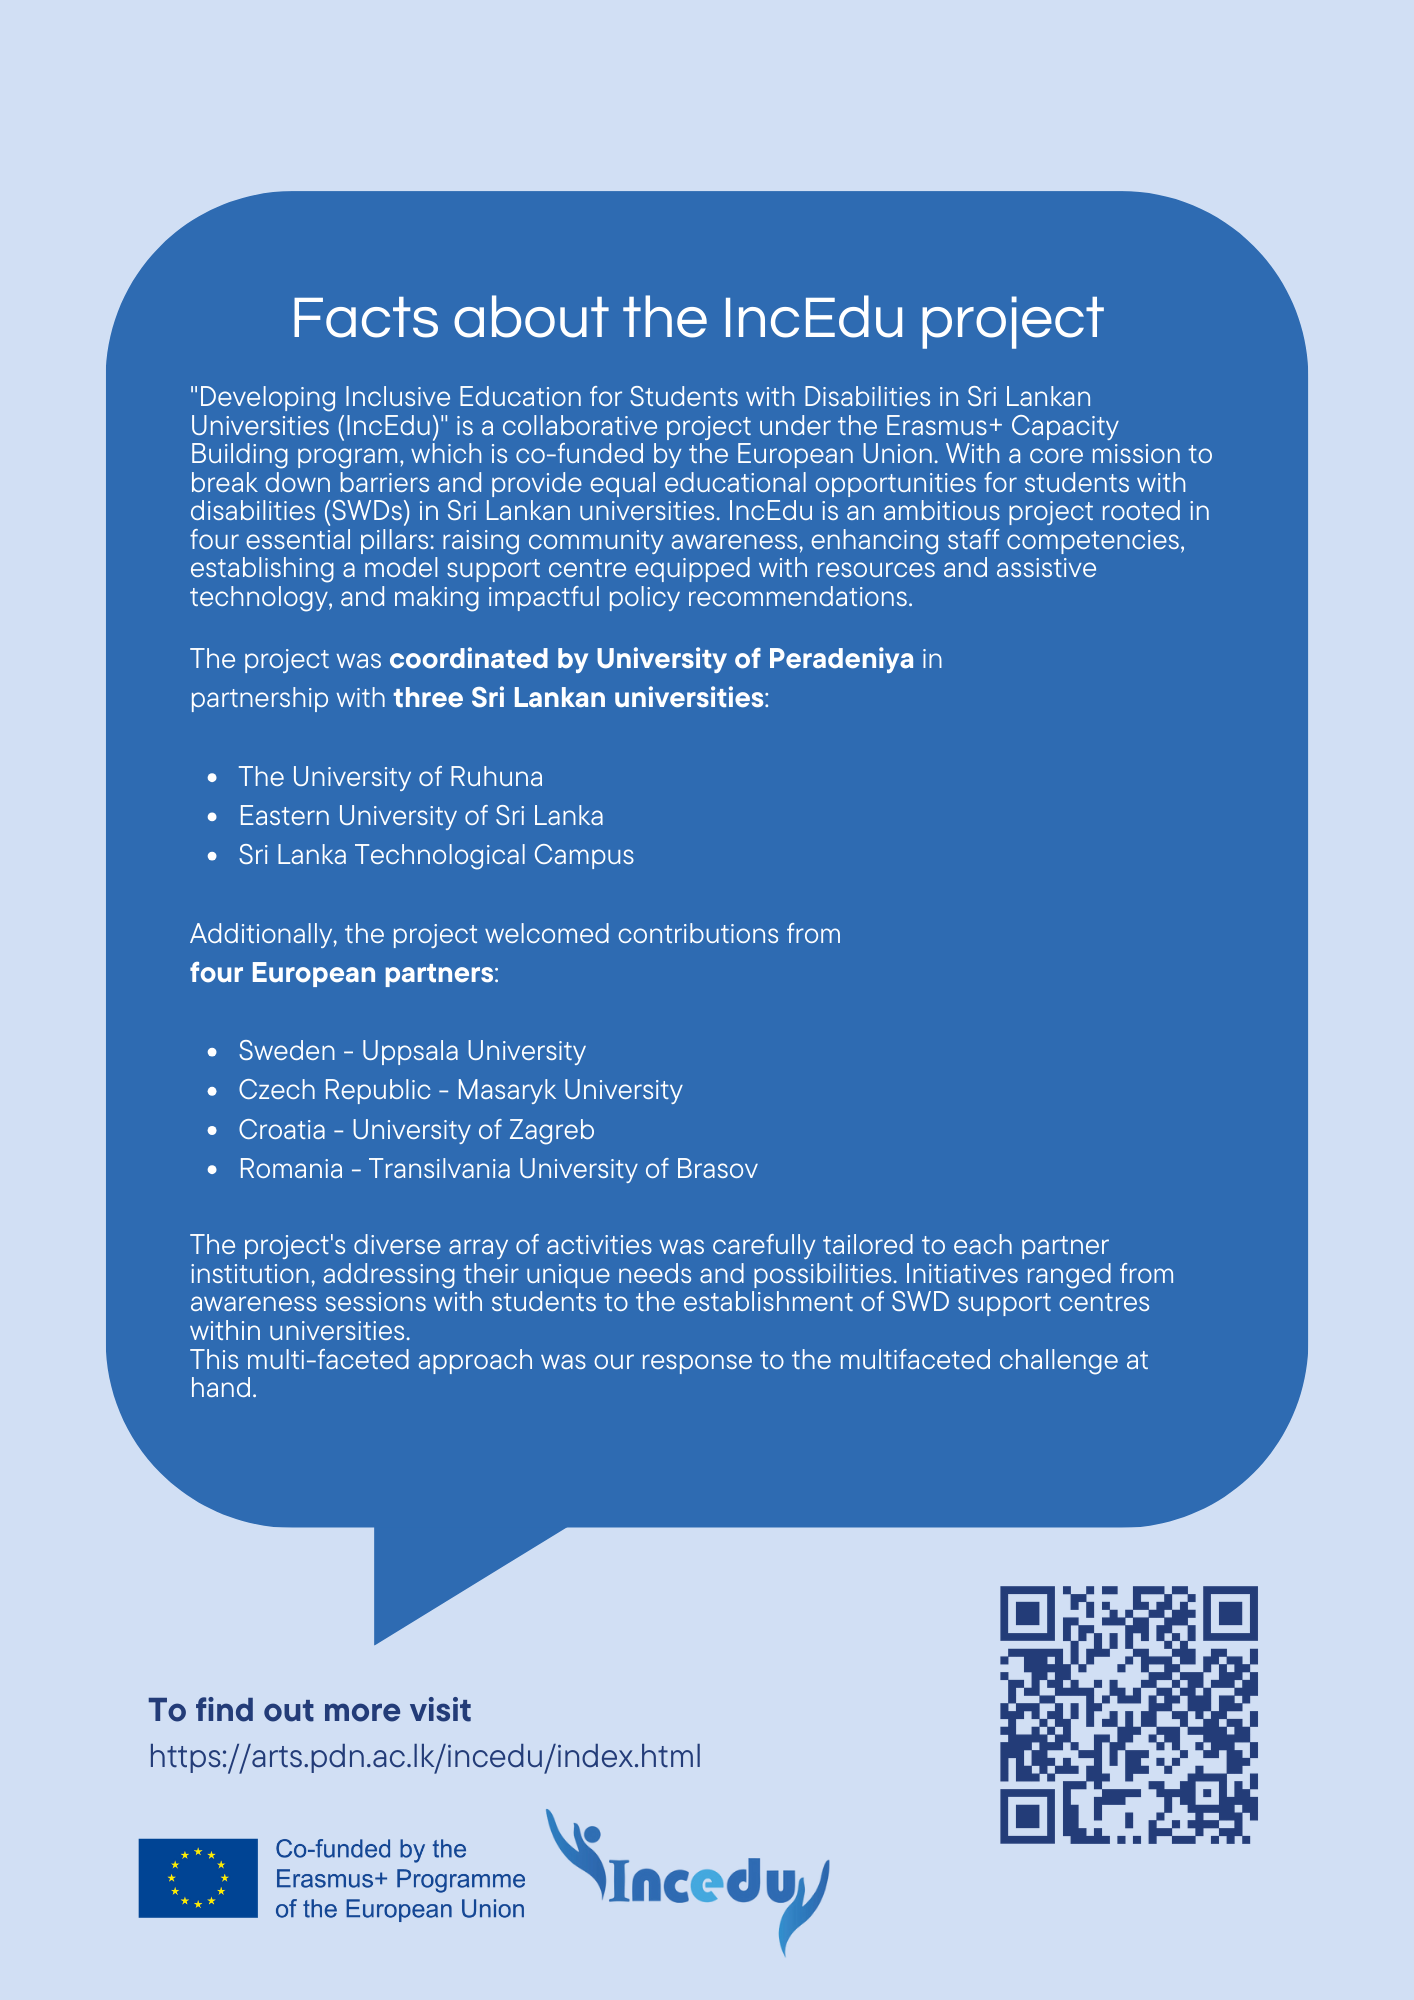 Facts about IncEdu